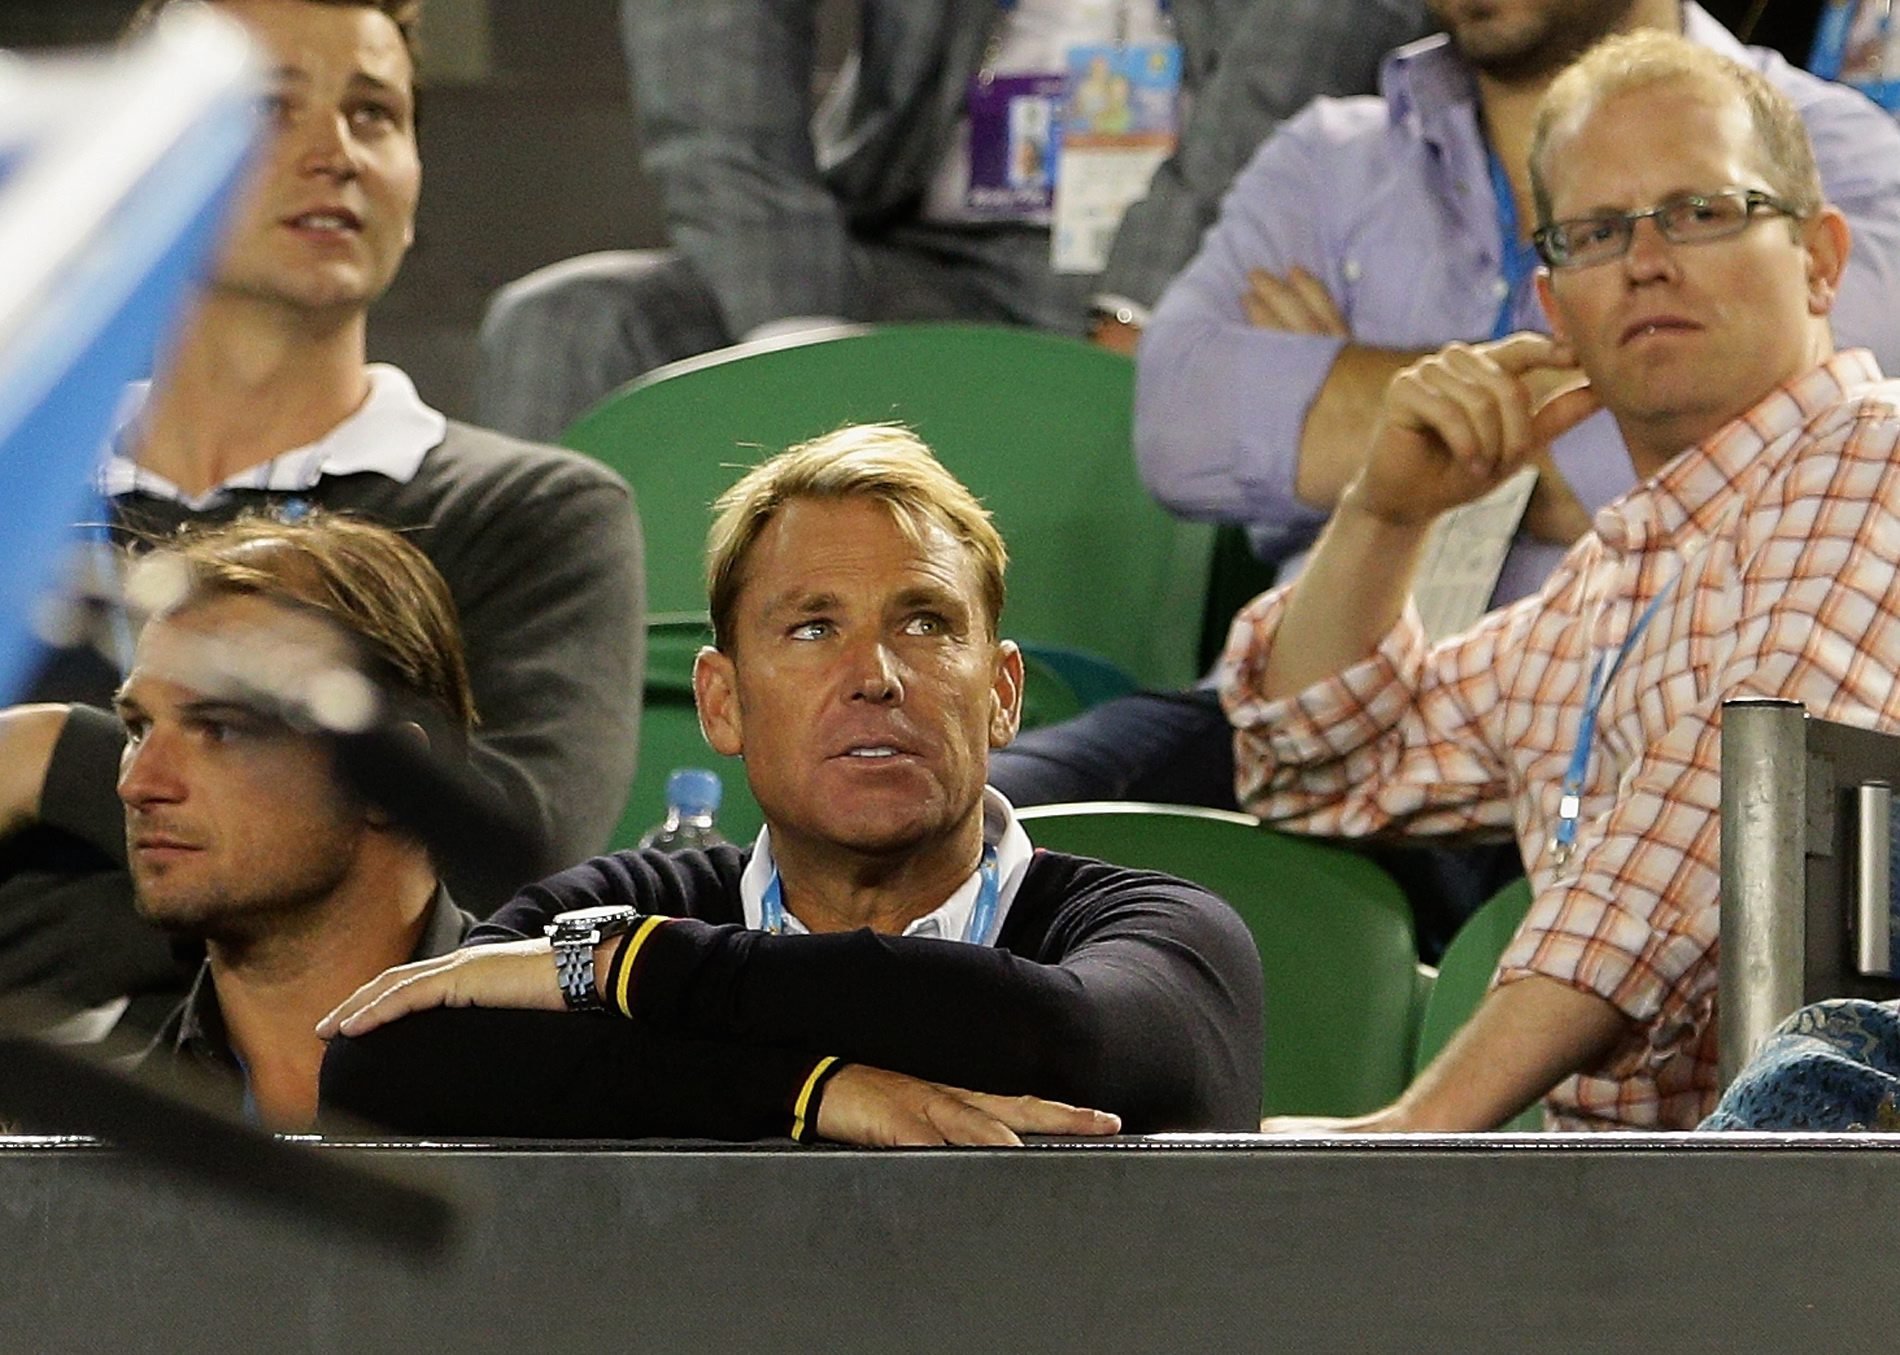 Australian cricketer Shane Warne has been spotted watching tennis matches before. Photo: EPA